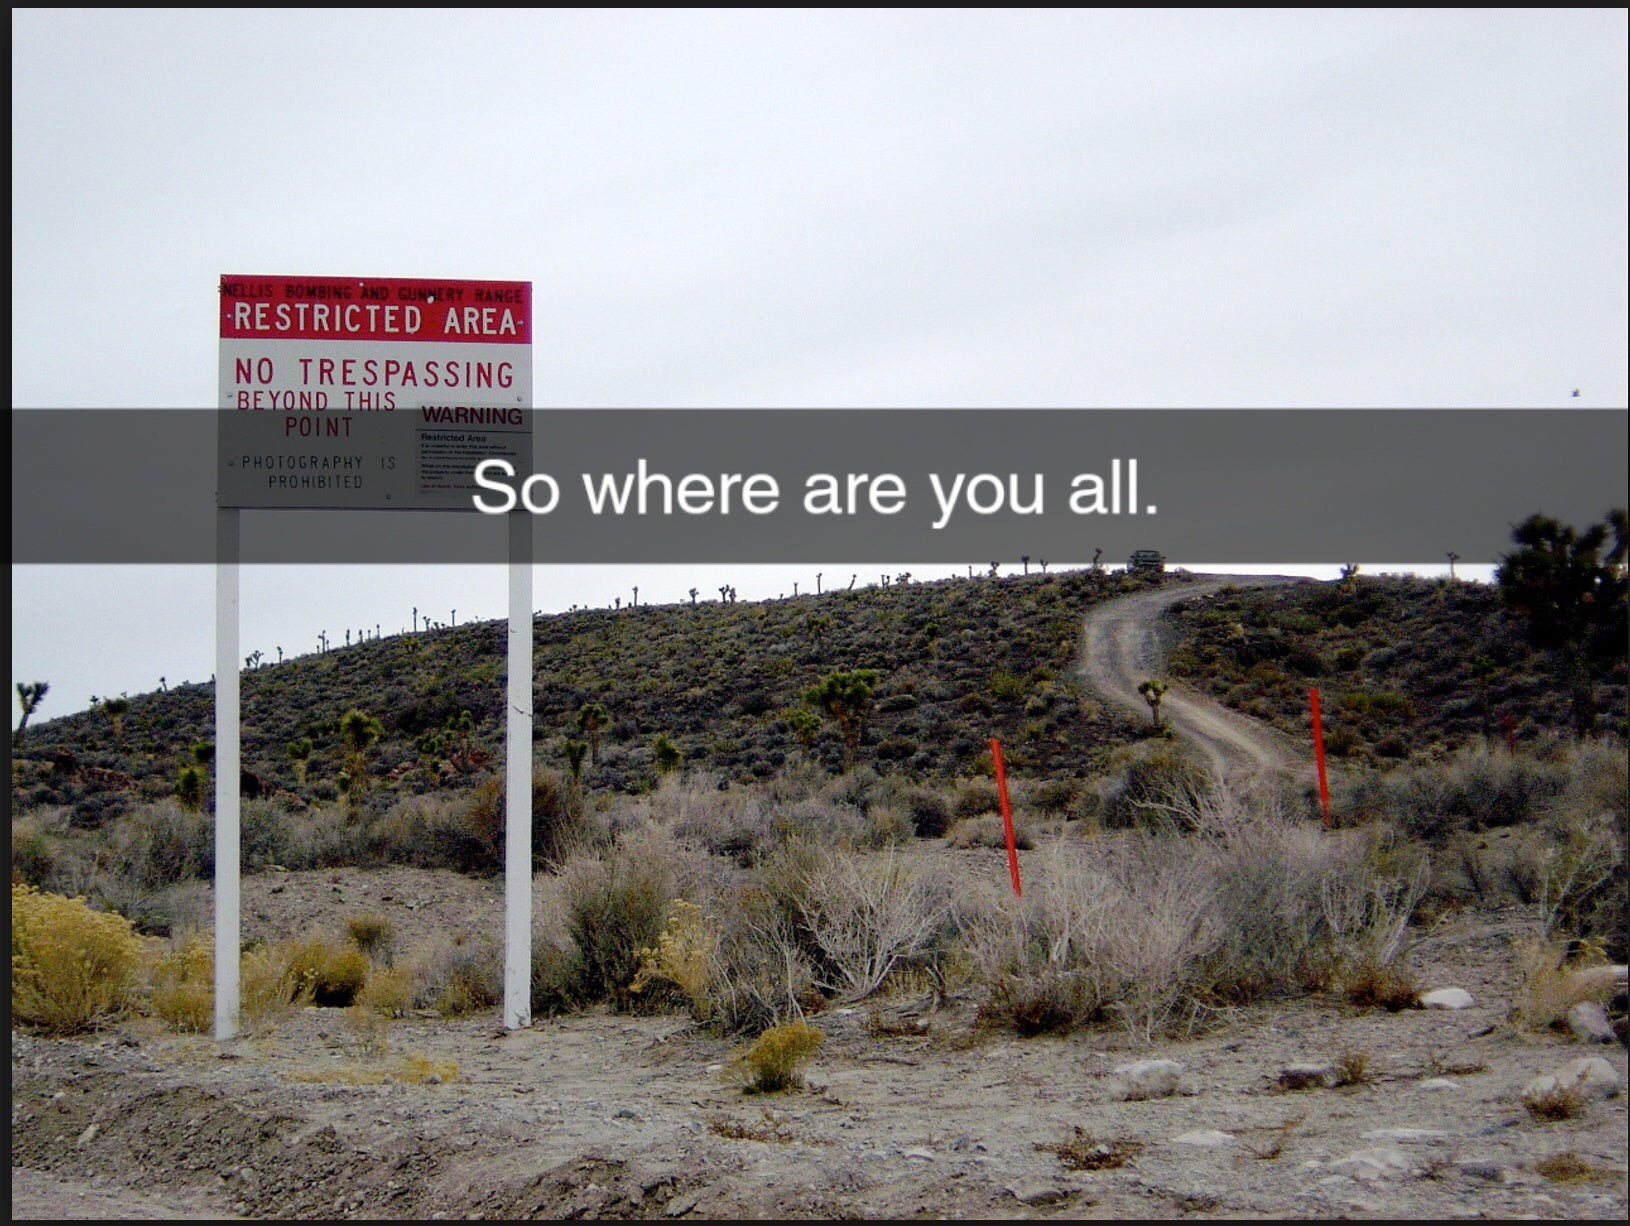 area 51 - Restricted Area No Trespassing Reyond This Point So where are you all.